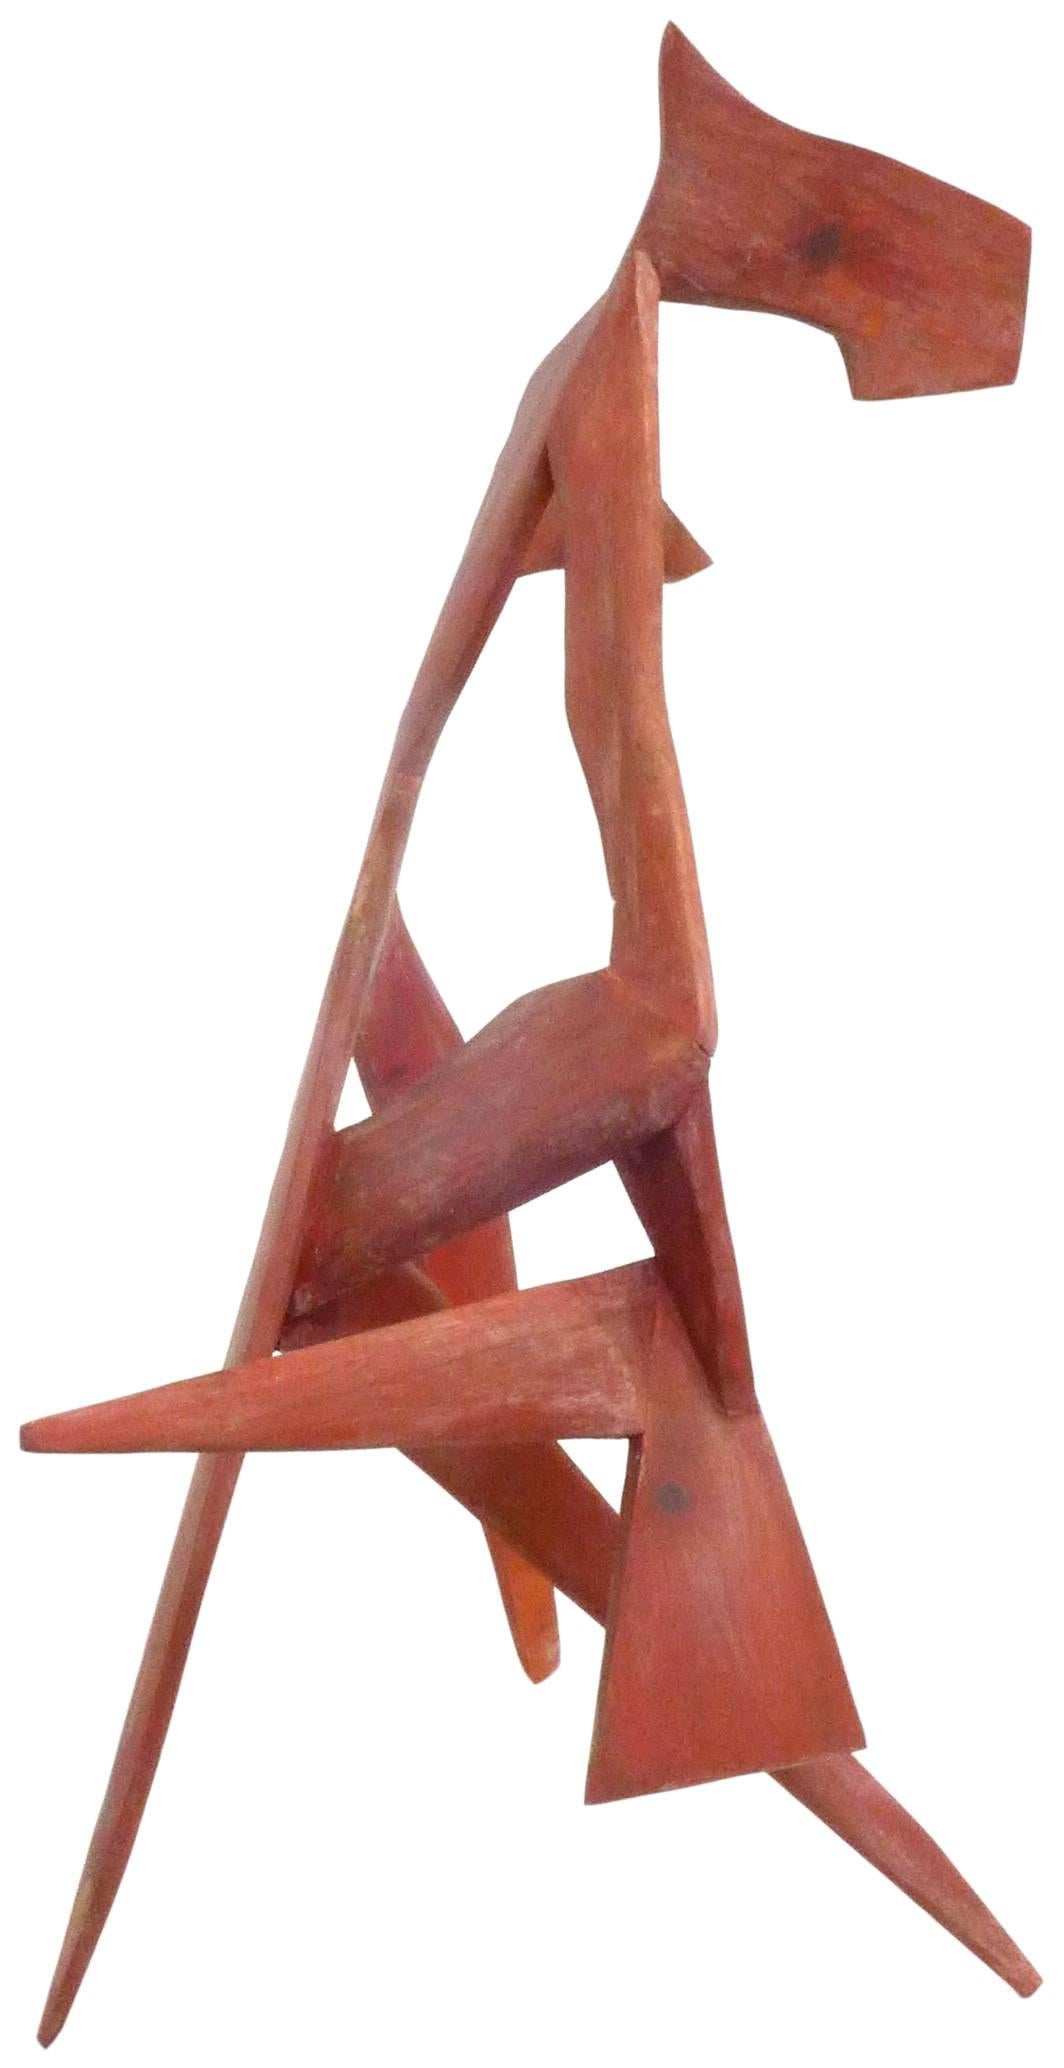 American Modernist Abstract Wood Sculpture